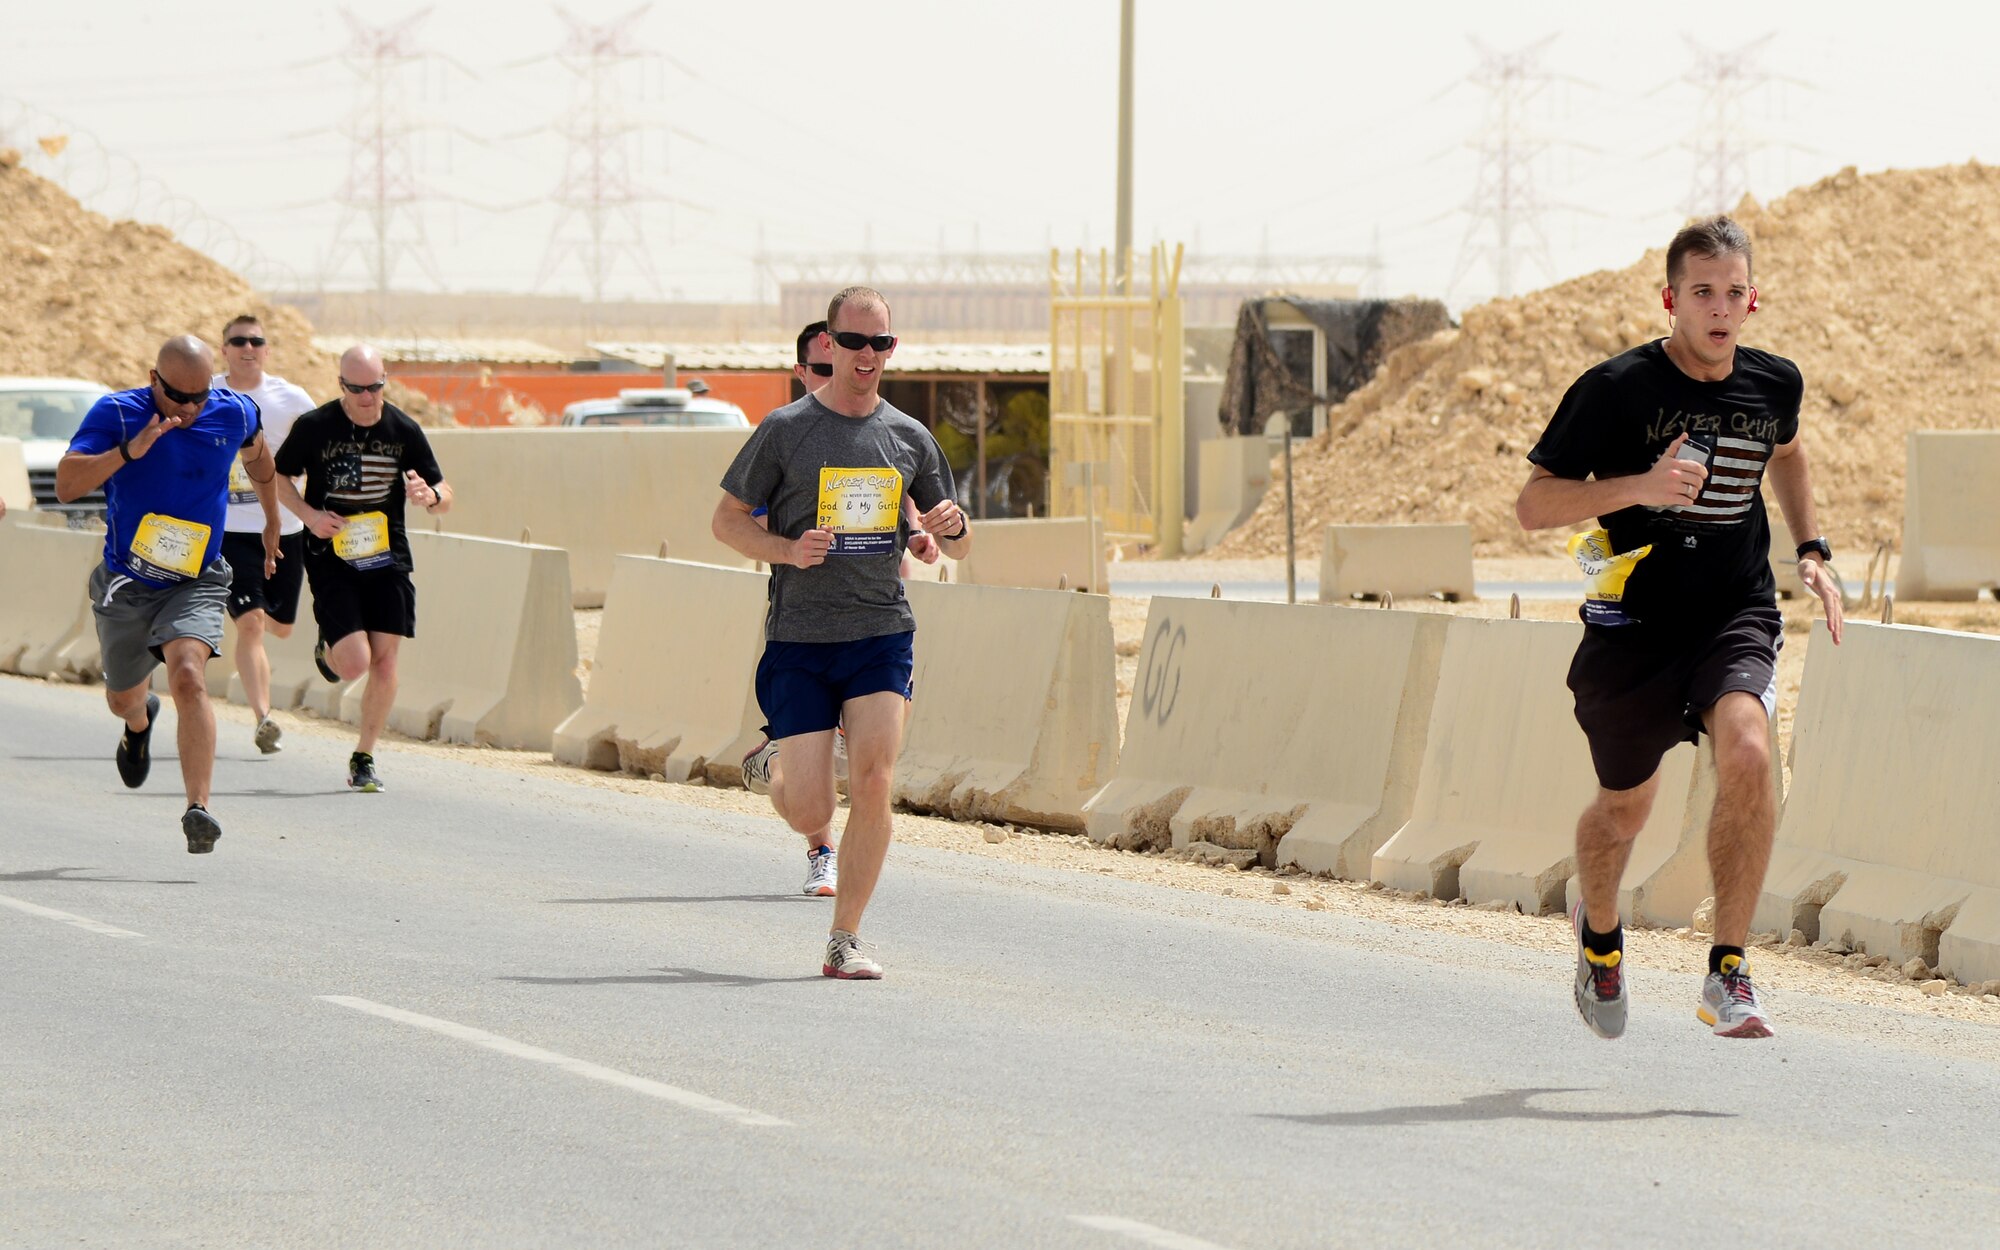 Participants of the 379th Air Expeditionary Wing’s Never Quit event run a 5k, April 4, 2015, at Al Udeid Air Base, Qatar. The event was coordinated by the 379th Expeditionary Force Support Squadron with informational booths provided by the 379th Expeditionary Medical Group, 379th Expeditionary Civil Engineer Squadron, and 379th AEW chapel services team. The purpose of the event was to encourage healthy and positive life choices. (U.S. Air Force photo by Senior Airman Kia Atkins)